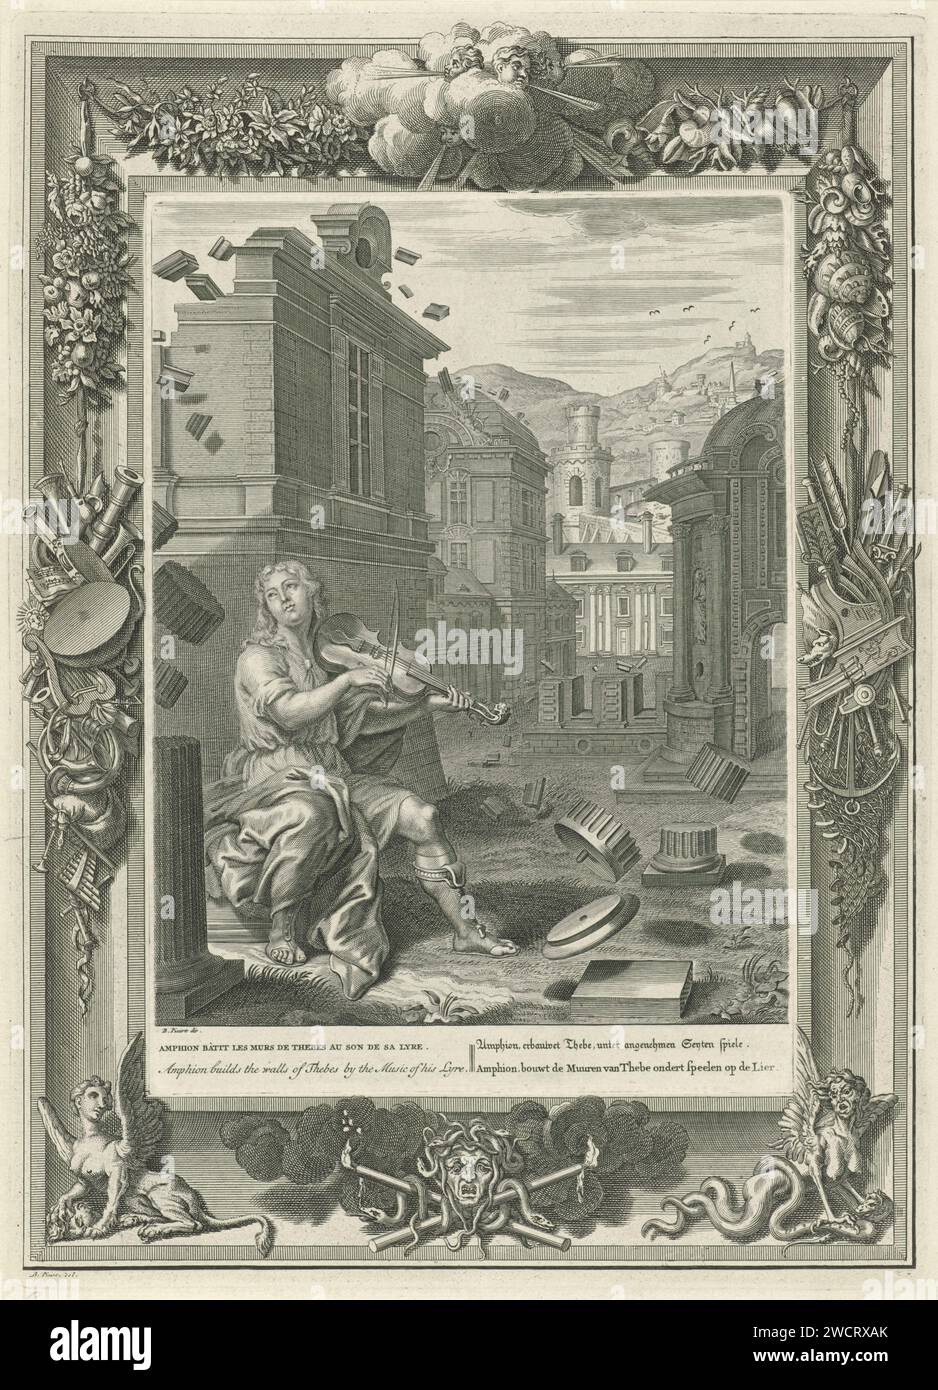 Amphion builds the walls of Thebes, Bernard Picart (workshop of), After Bernard Picart, 1733 print Amphion plays on his winch. The stones move on its own initiative and form the city walls of Thebes. In the margin the title in French, English, German and Dutch. The performance is decorated with an ornamental edge. Amsterdam paper etching / engraving Amphion building the walls of Thebes (without Zethus). scrollwork, strapwork  ornament Stock Photo